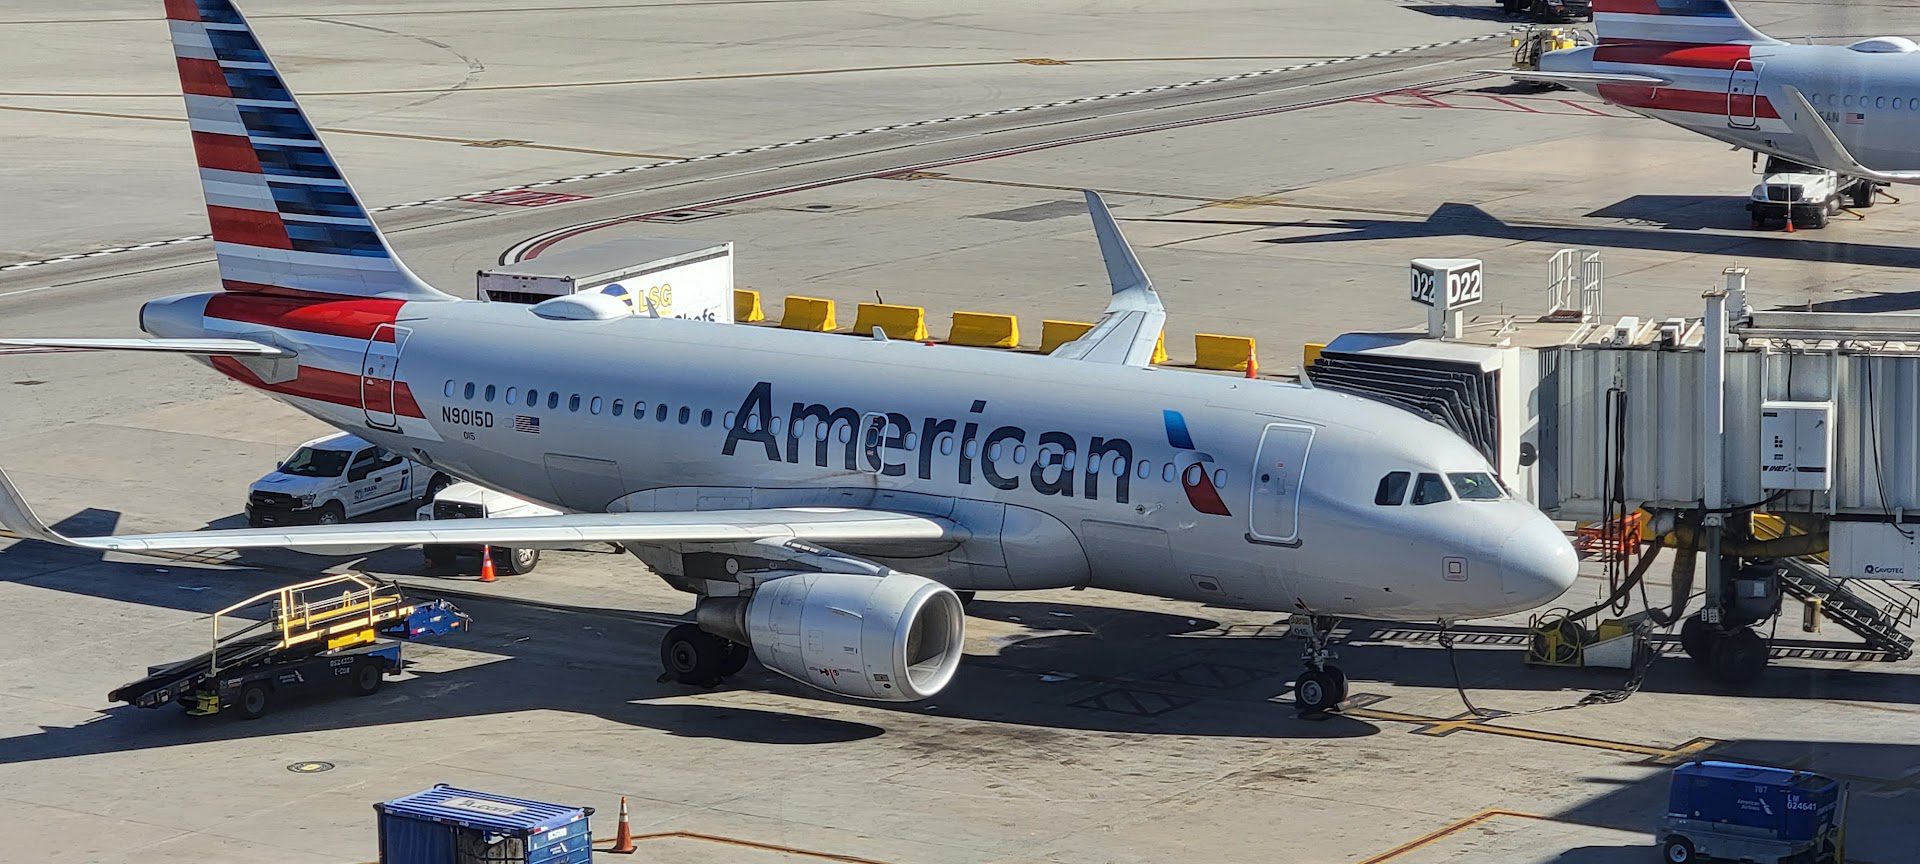 Here's The American Airlines Plan For Its Fleet In 2023 View from the